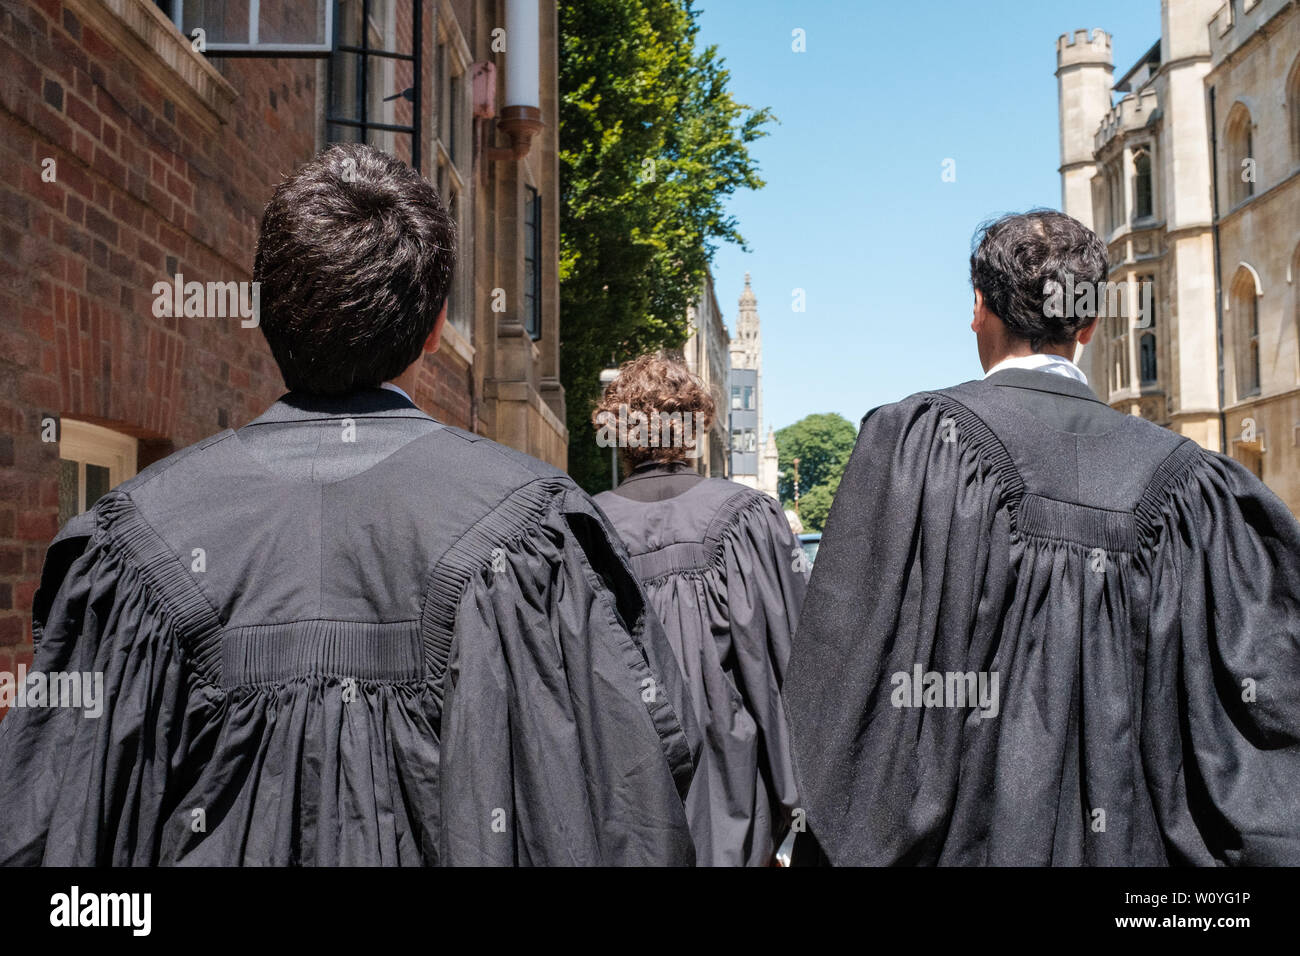 The backs of three University of Cambridge graduates walking along the road with the gowns shown. Stock Photo